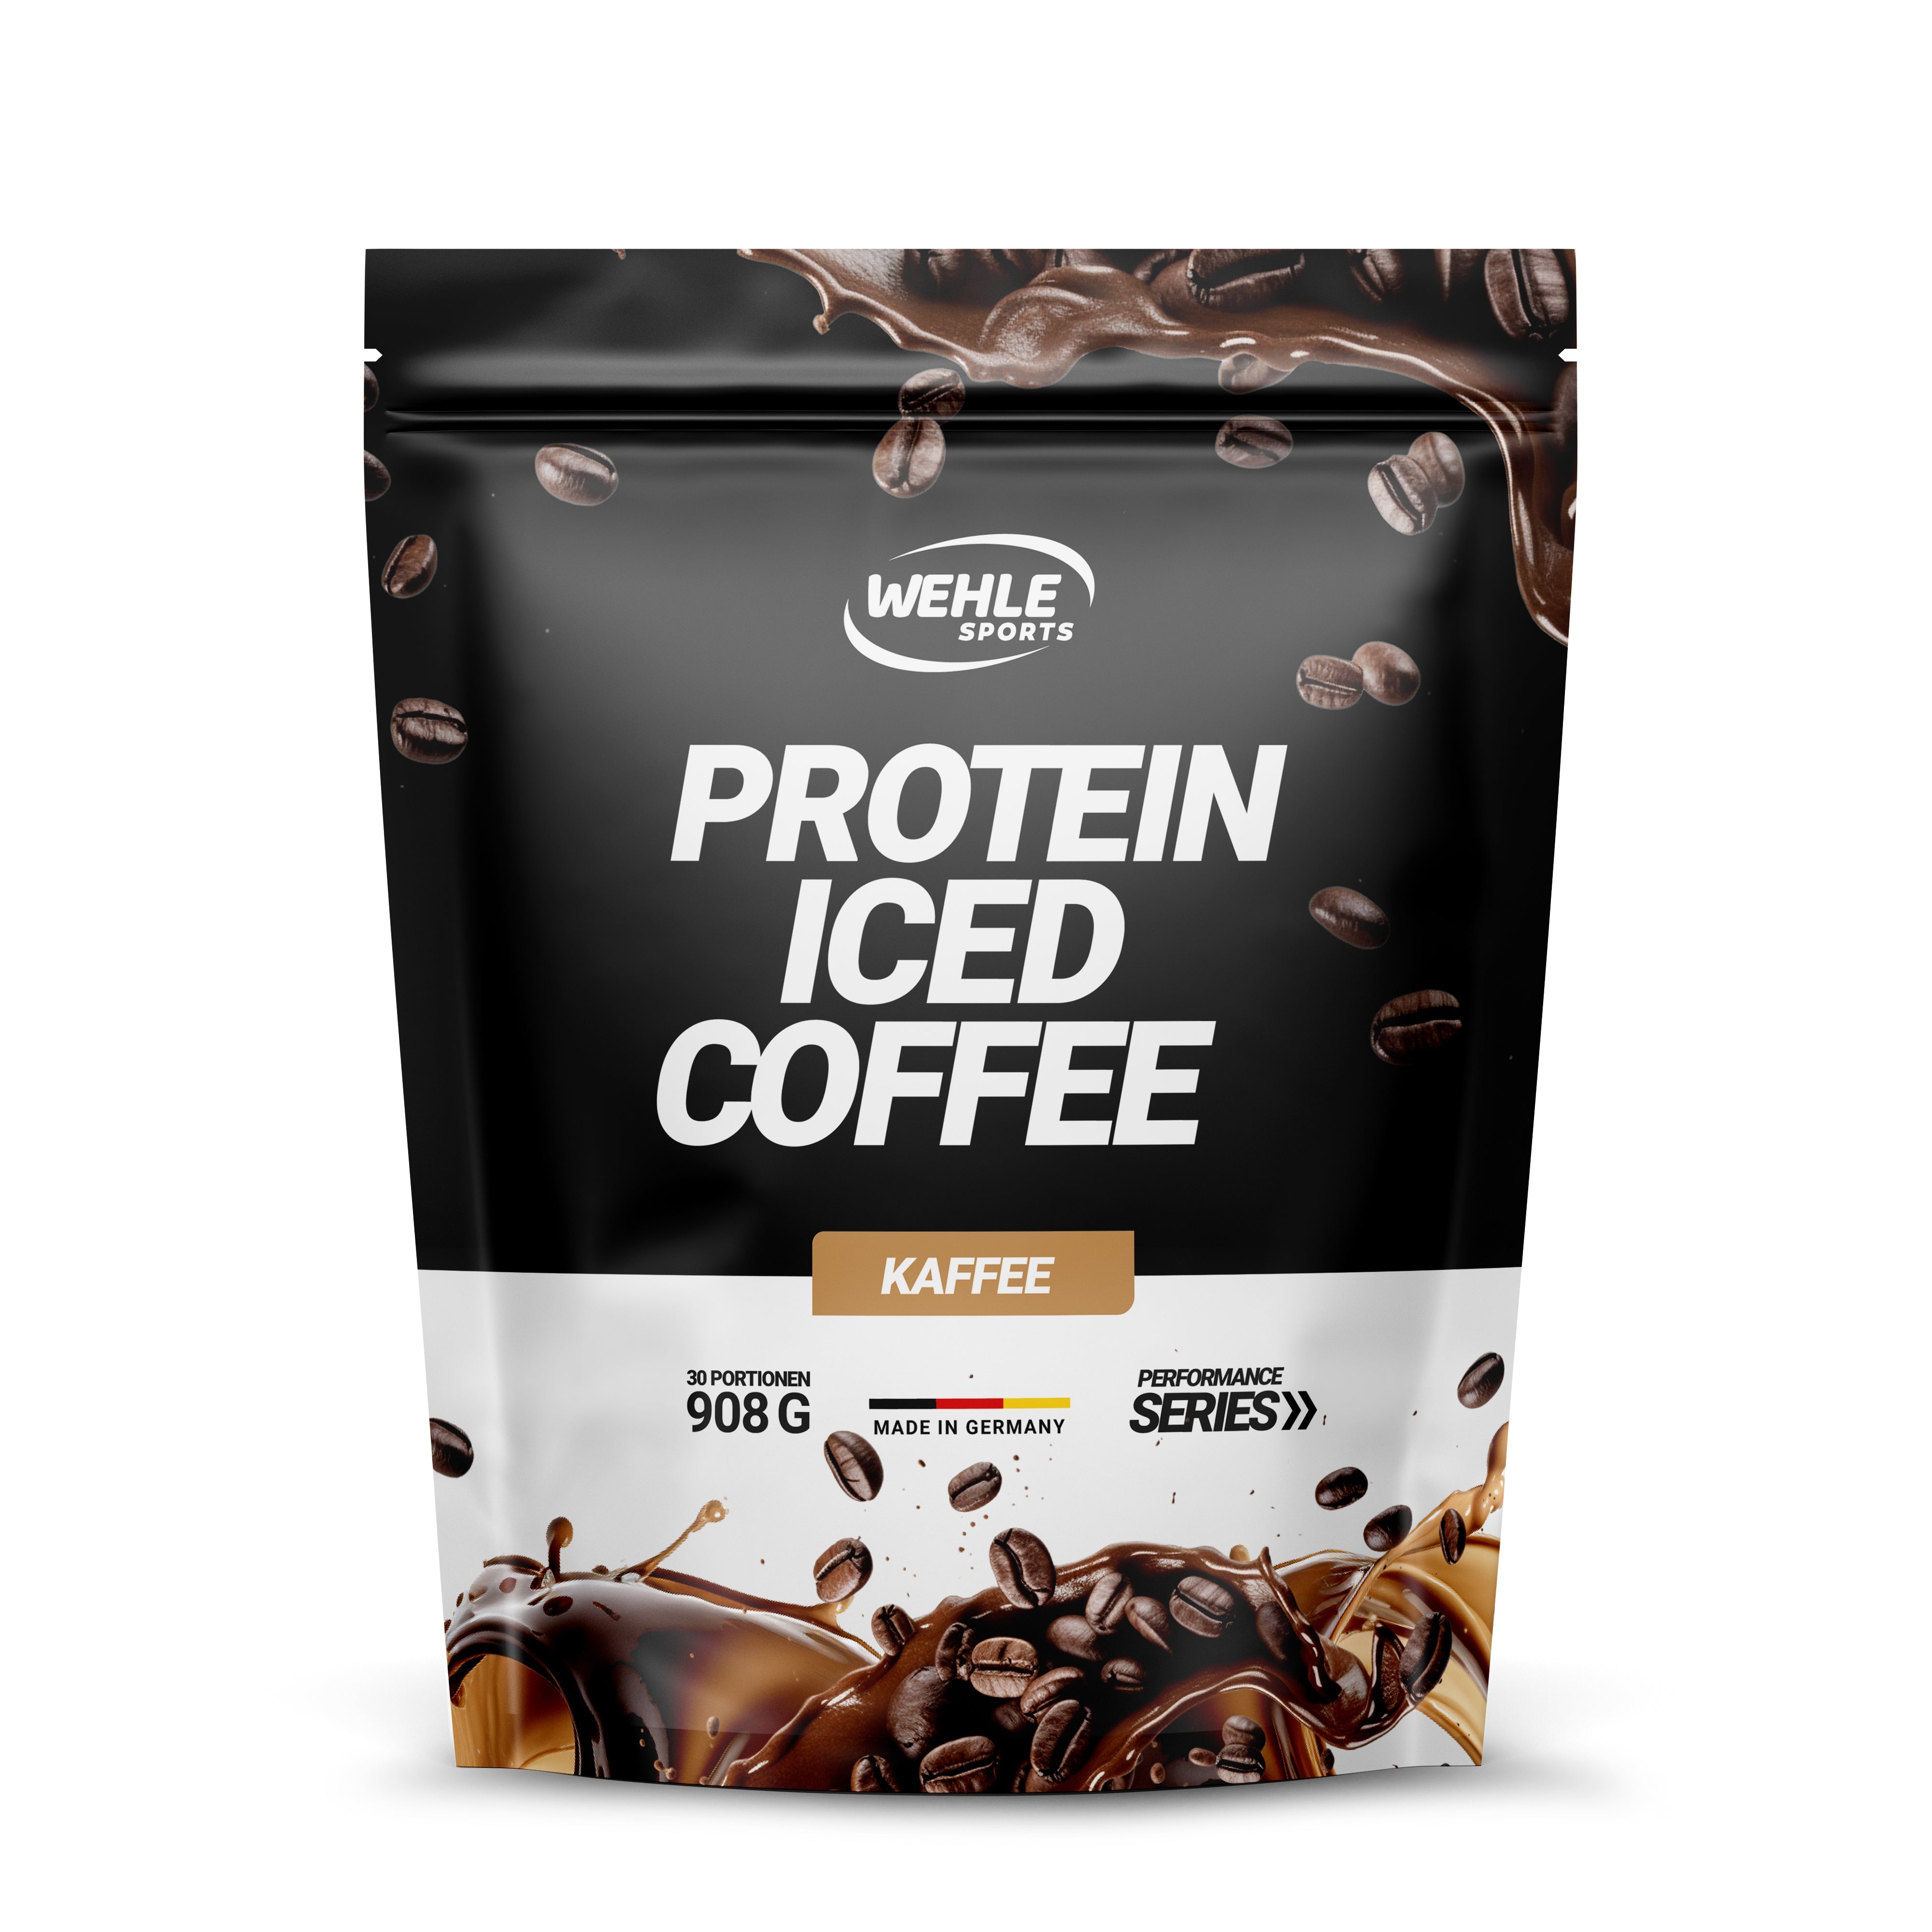 Wehle Protein Iced Coffee